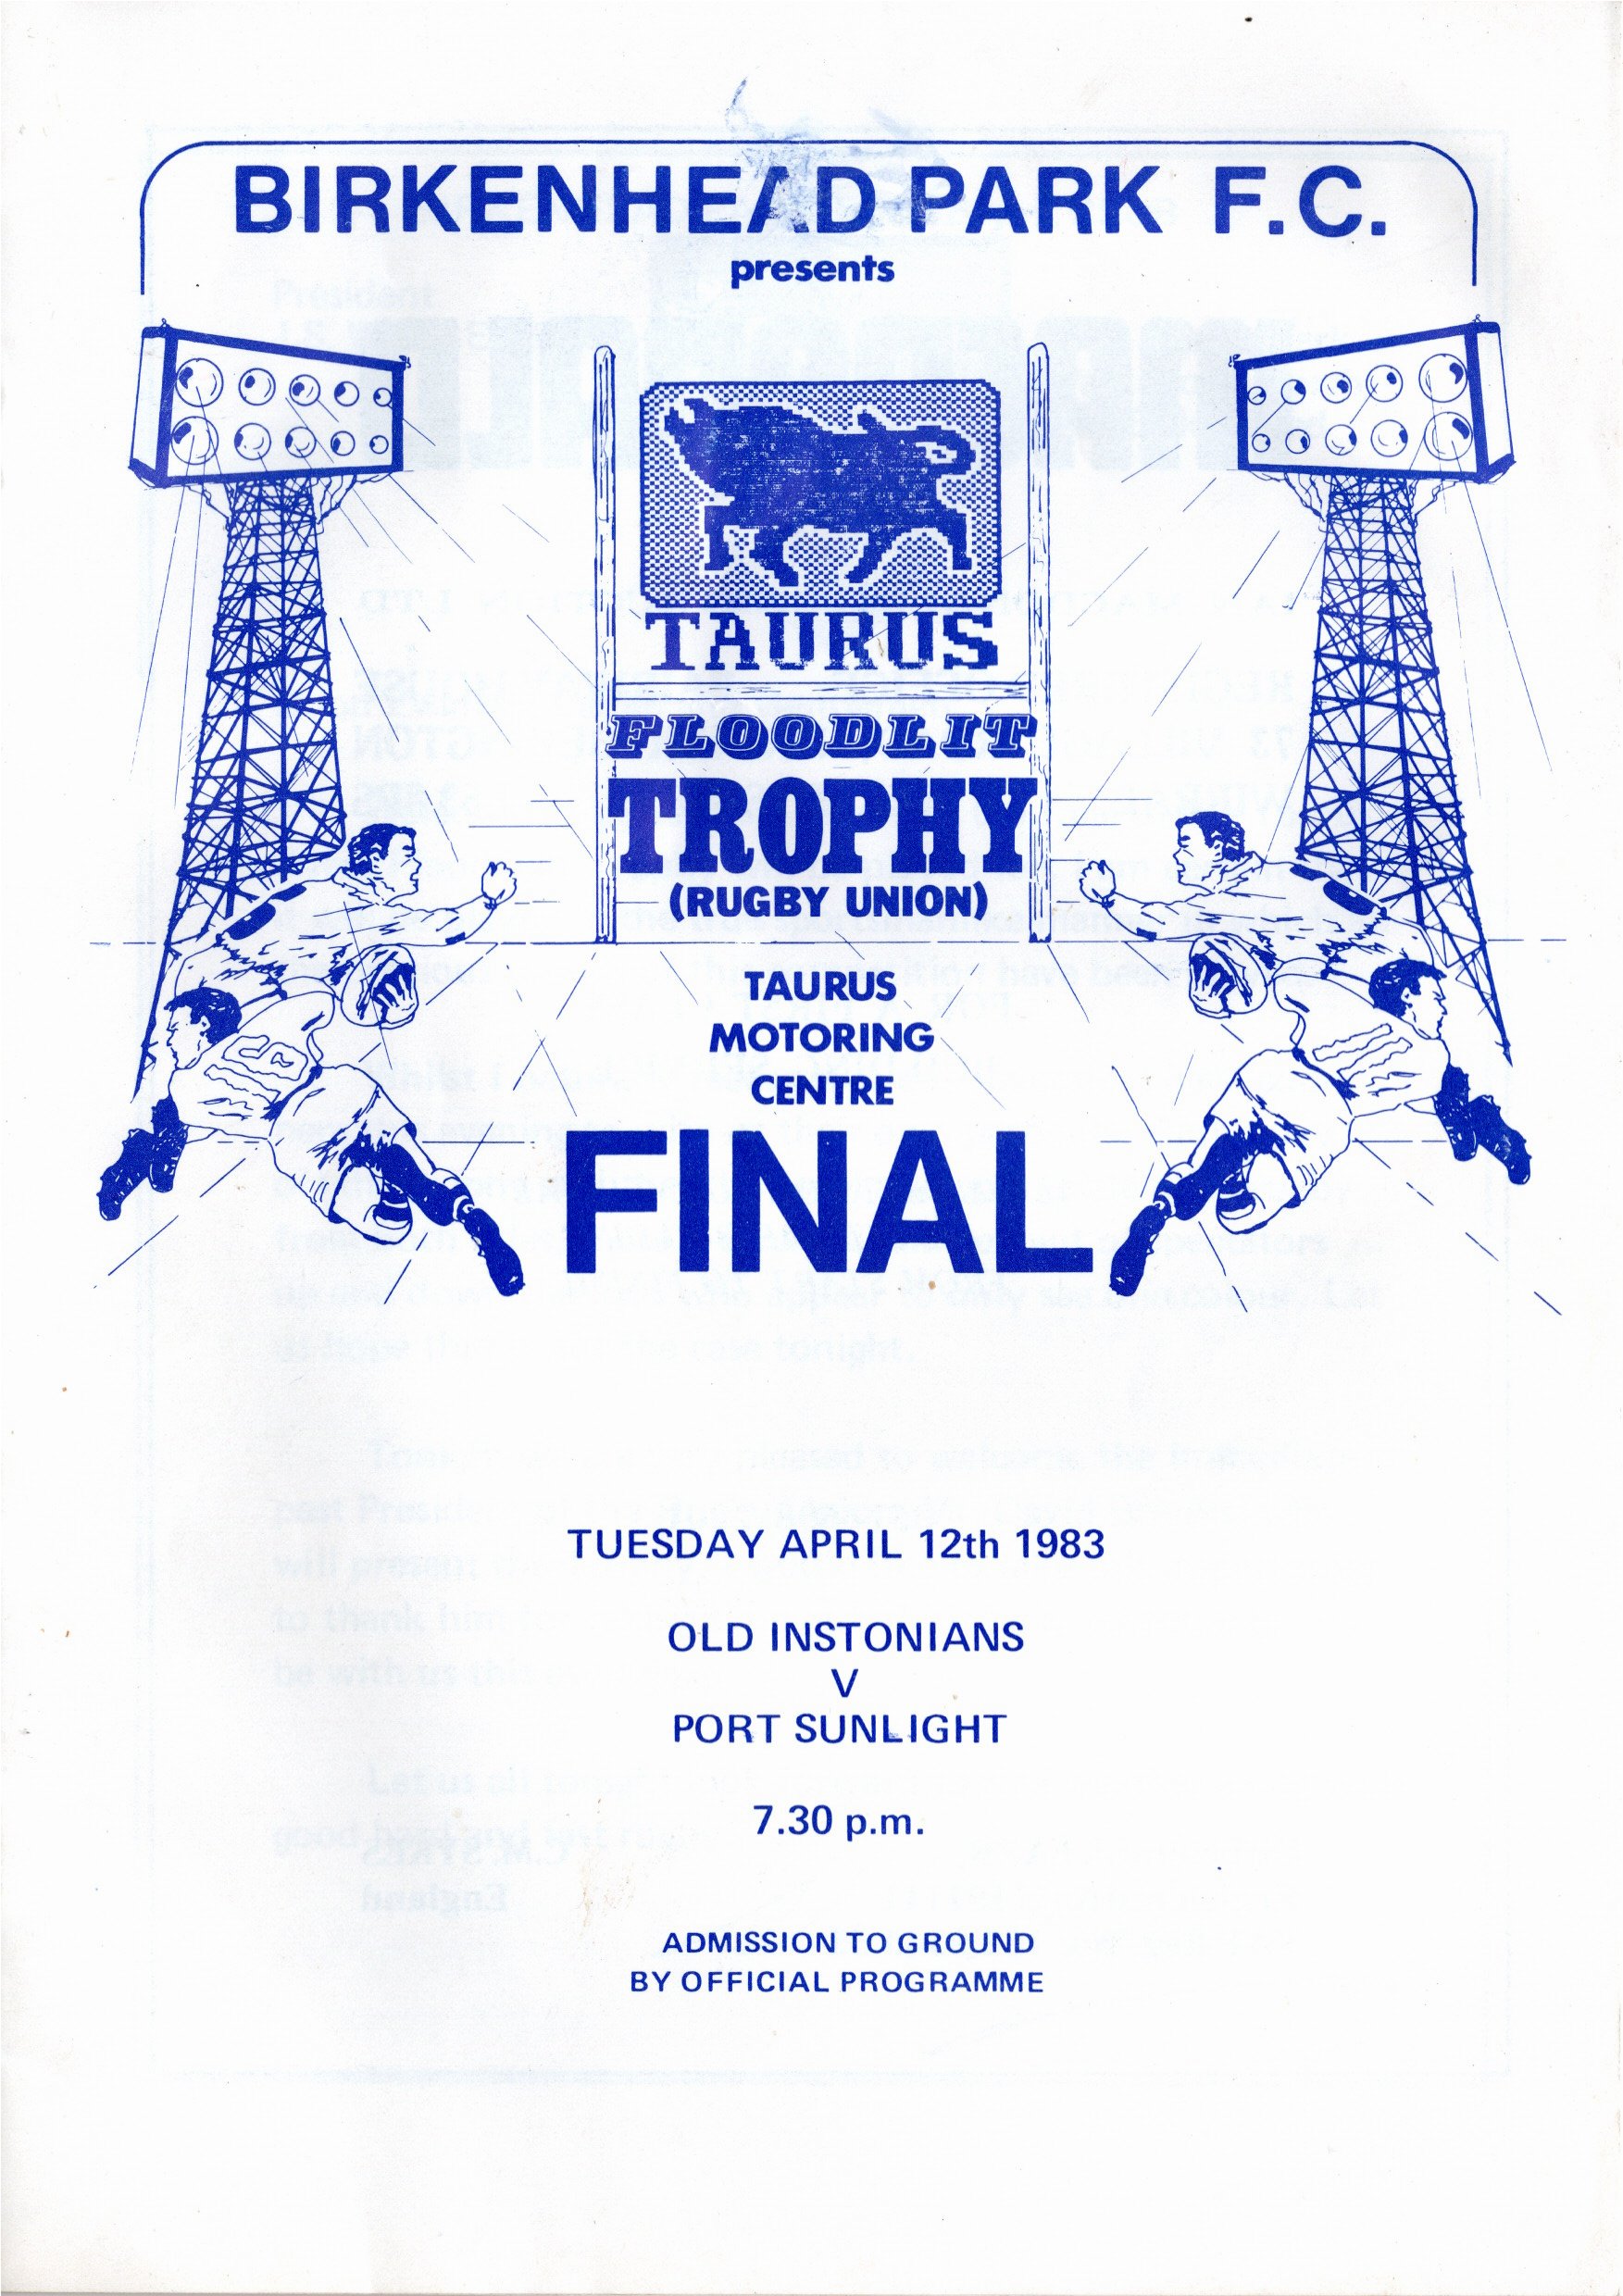 Old Instonians RUFC, 1983 Taurus Trophy Final